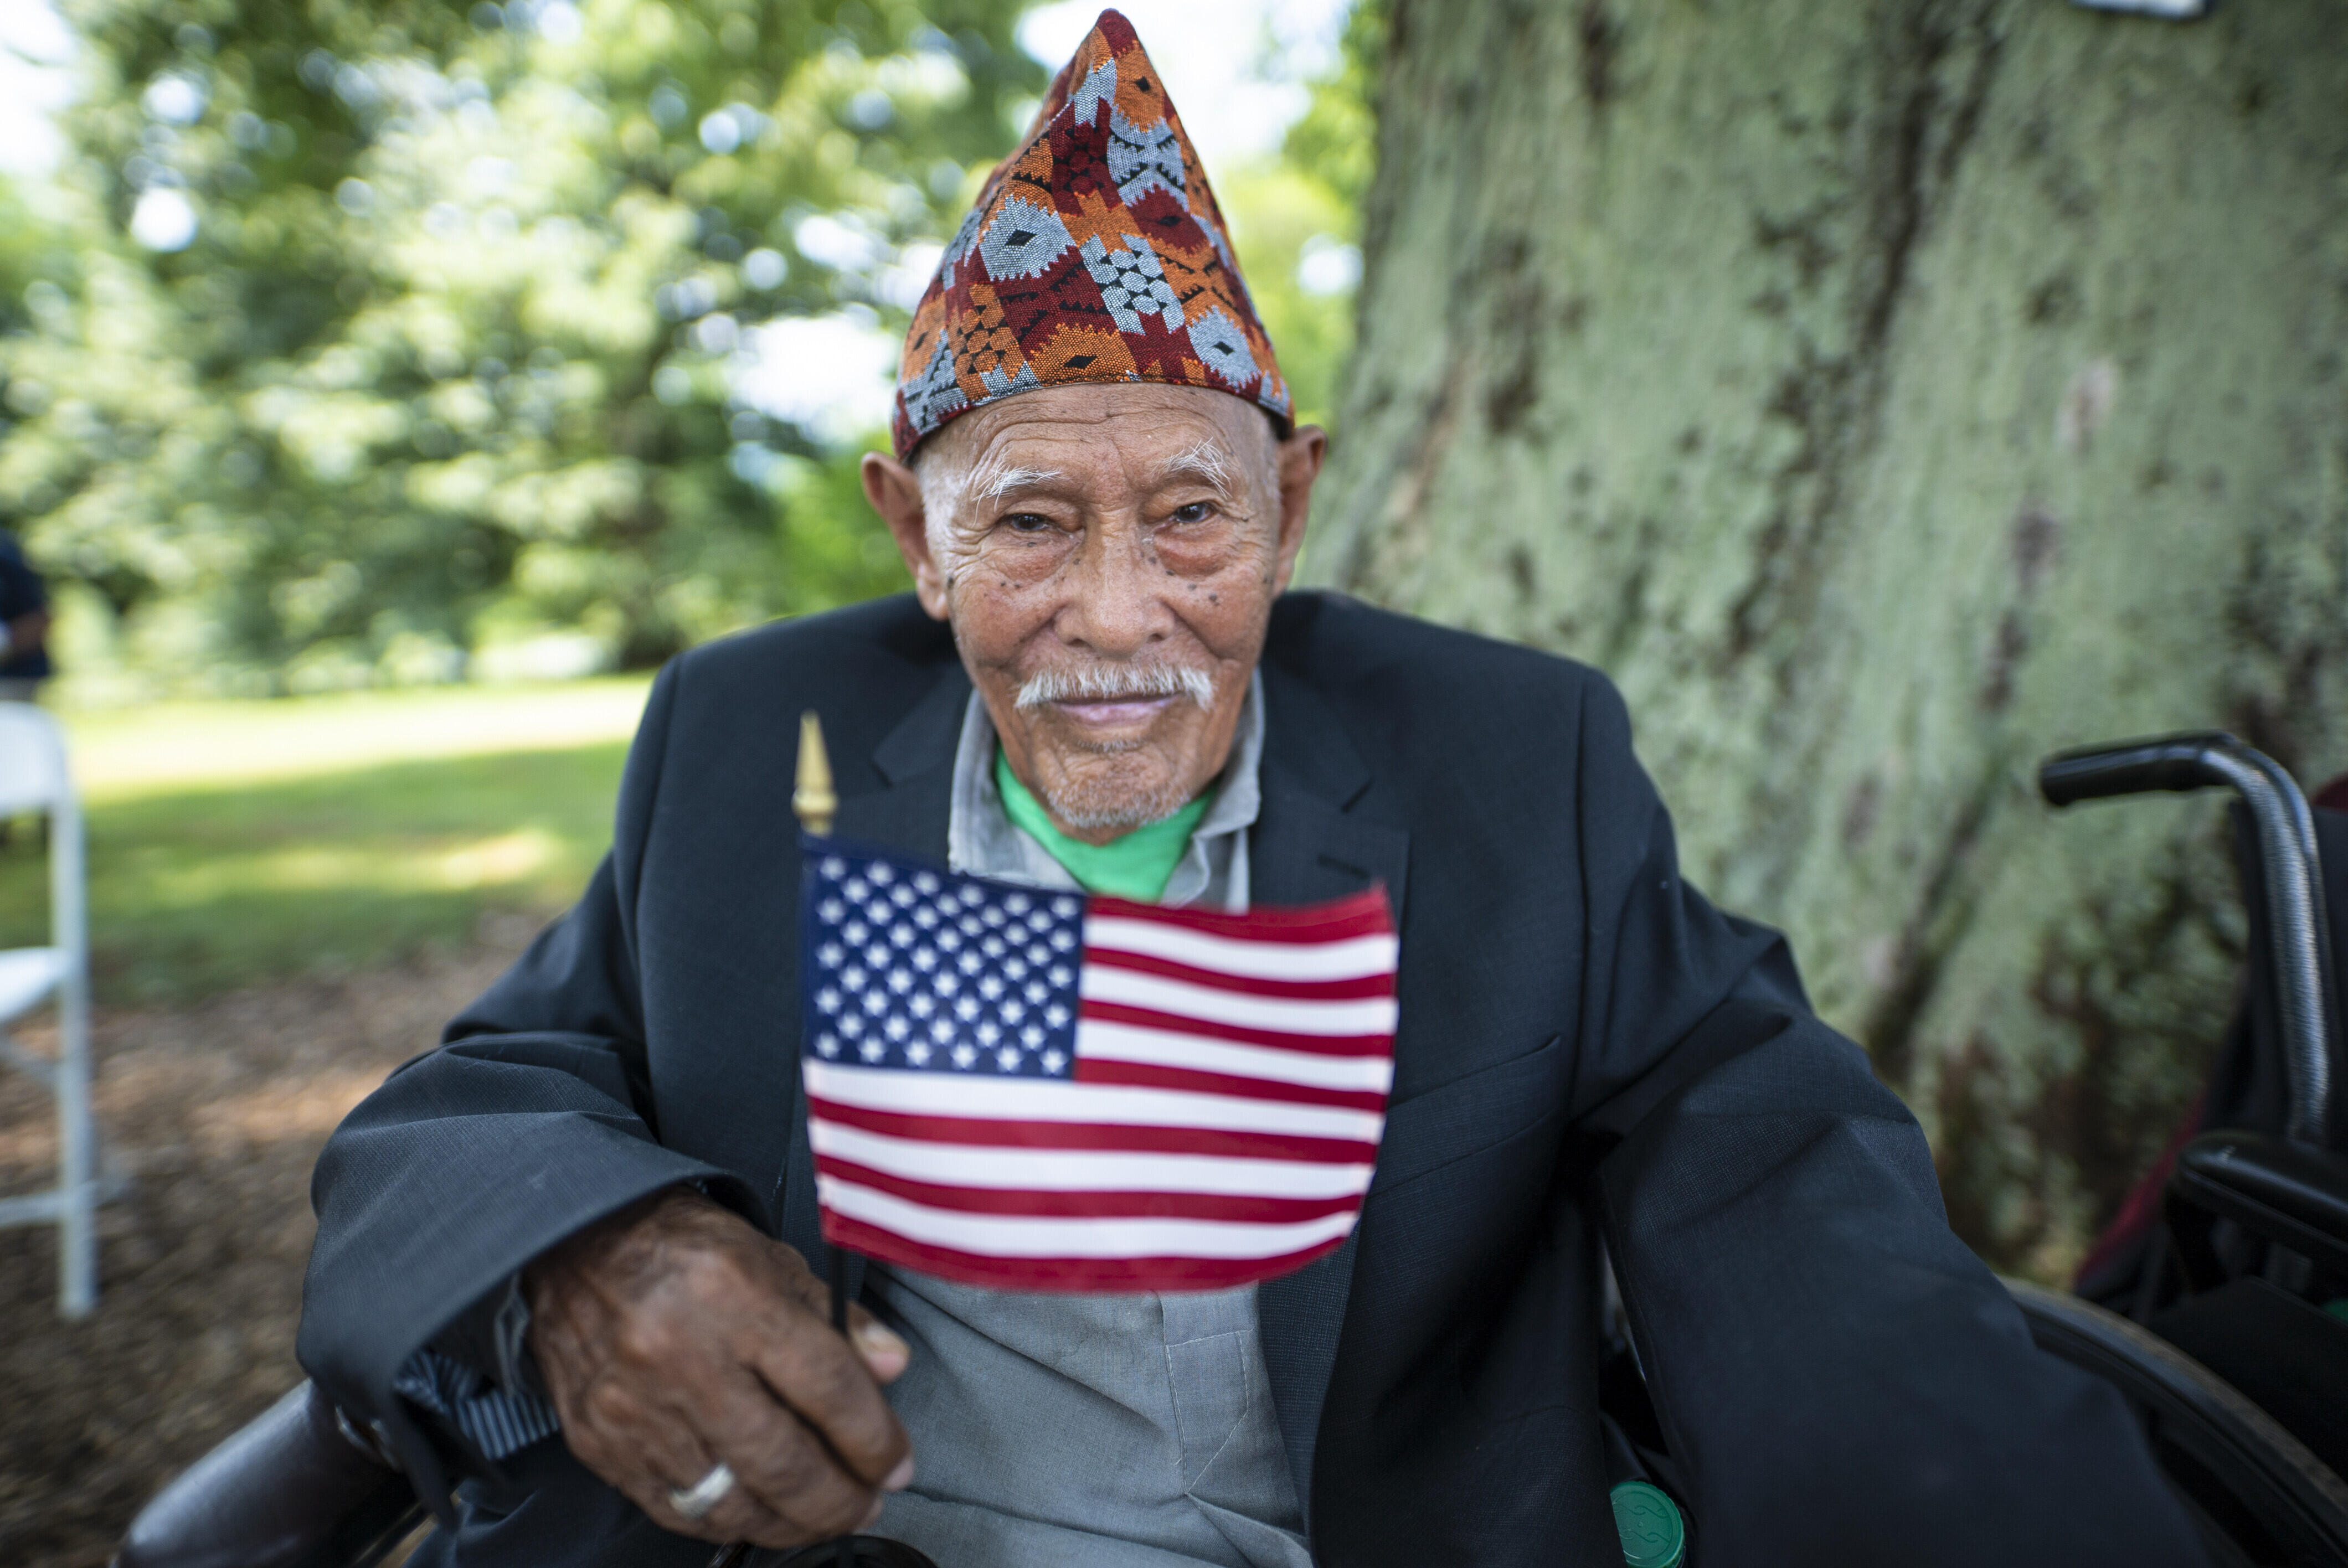 An older man and refugee at a citizenship ceremony sits in front of a tree holding an American flag